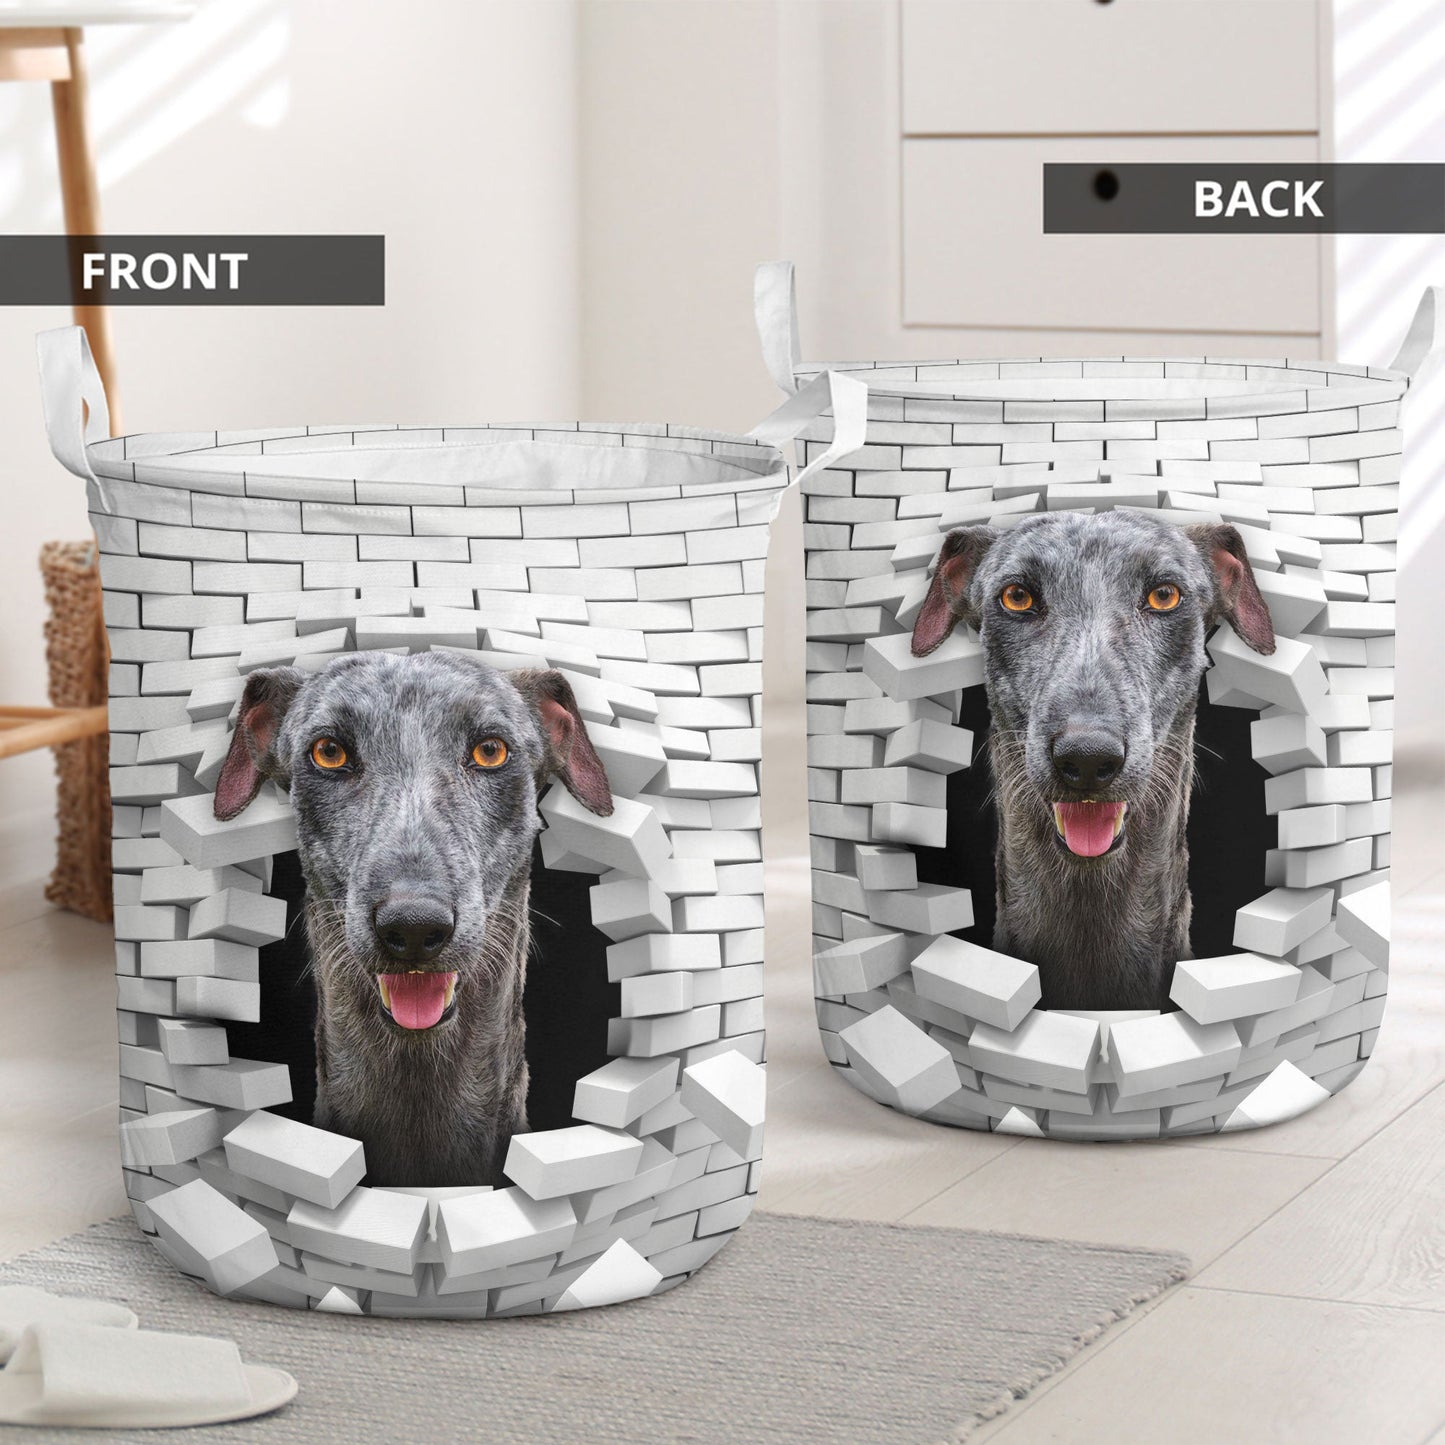 Greyhound - In The Hole Of Wall Pattern Laundry Basket